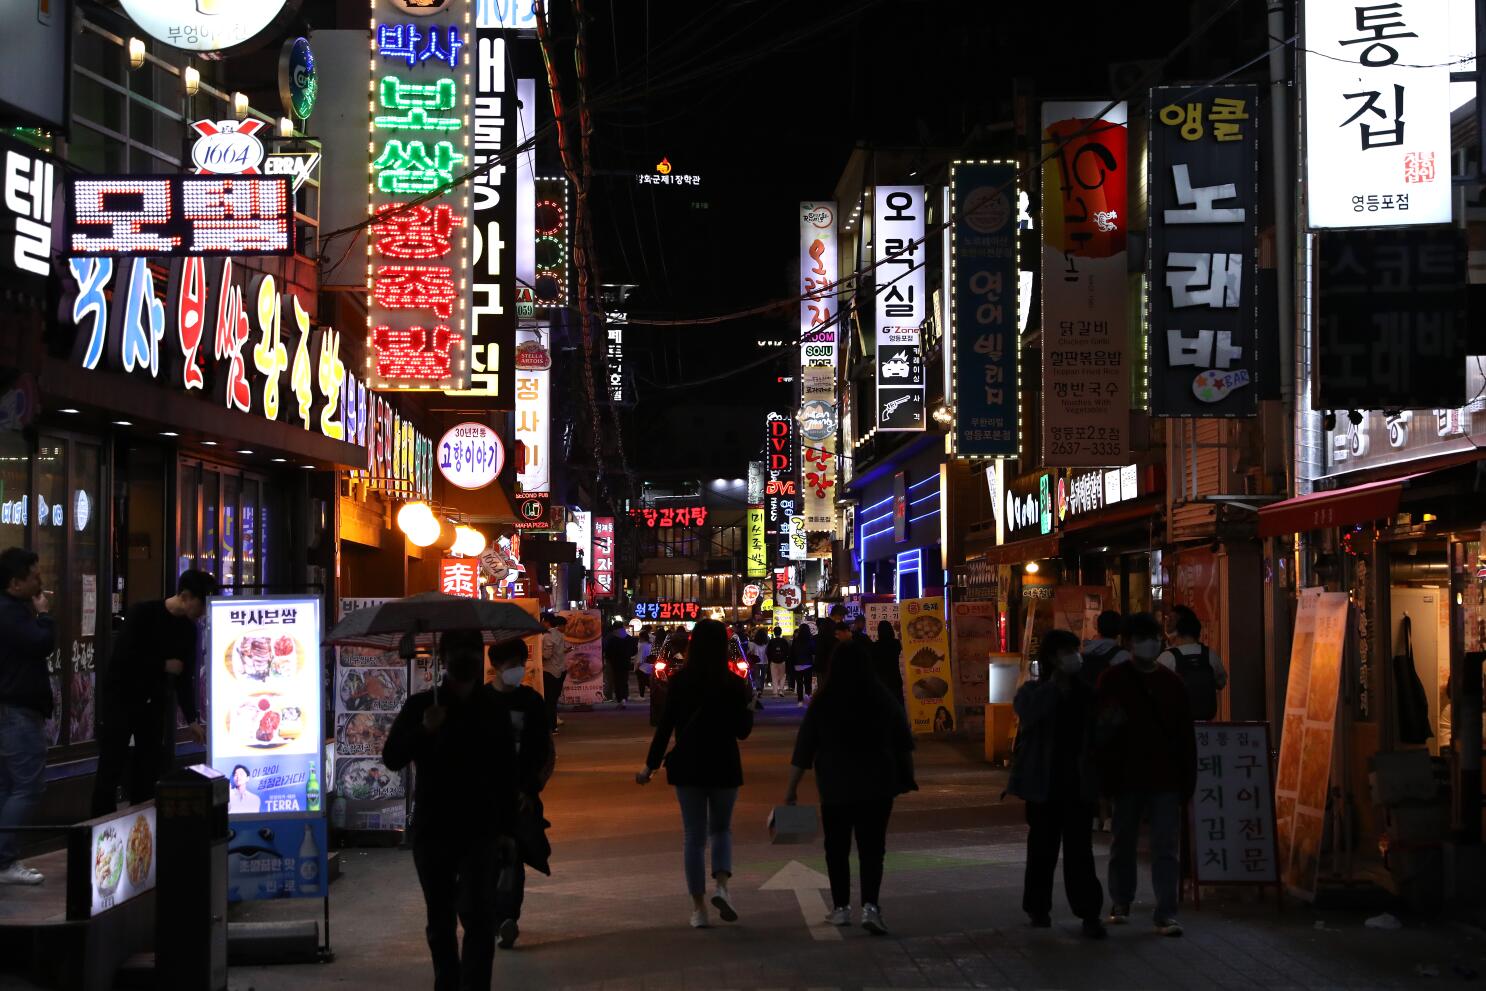 Korean media's focus on 'gay' club in COVID-19 case further